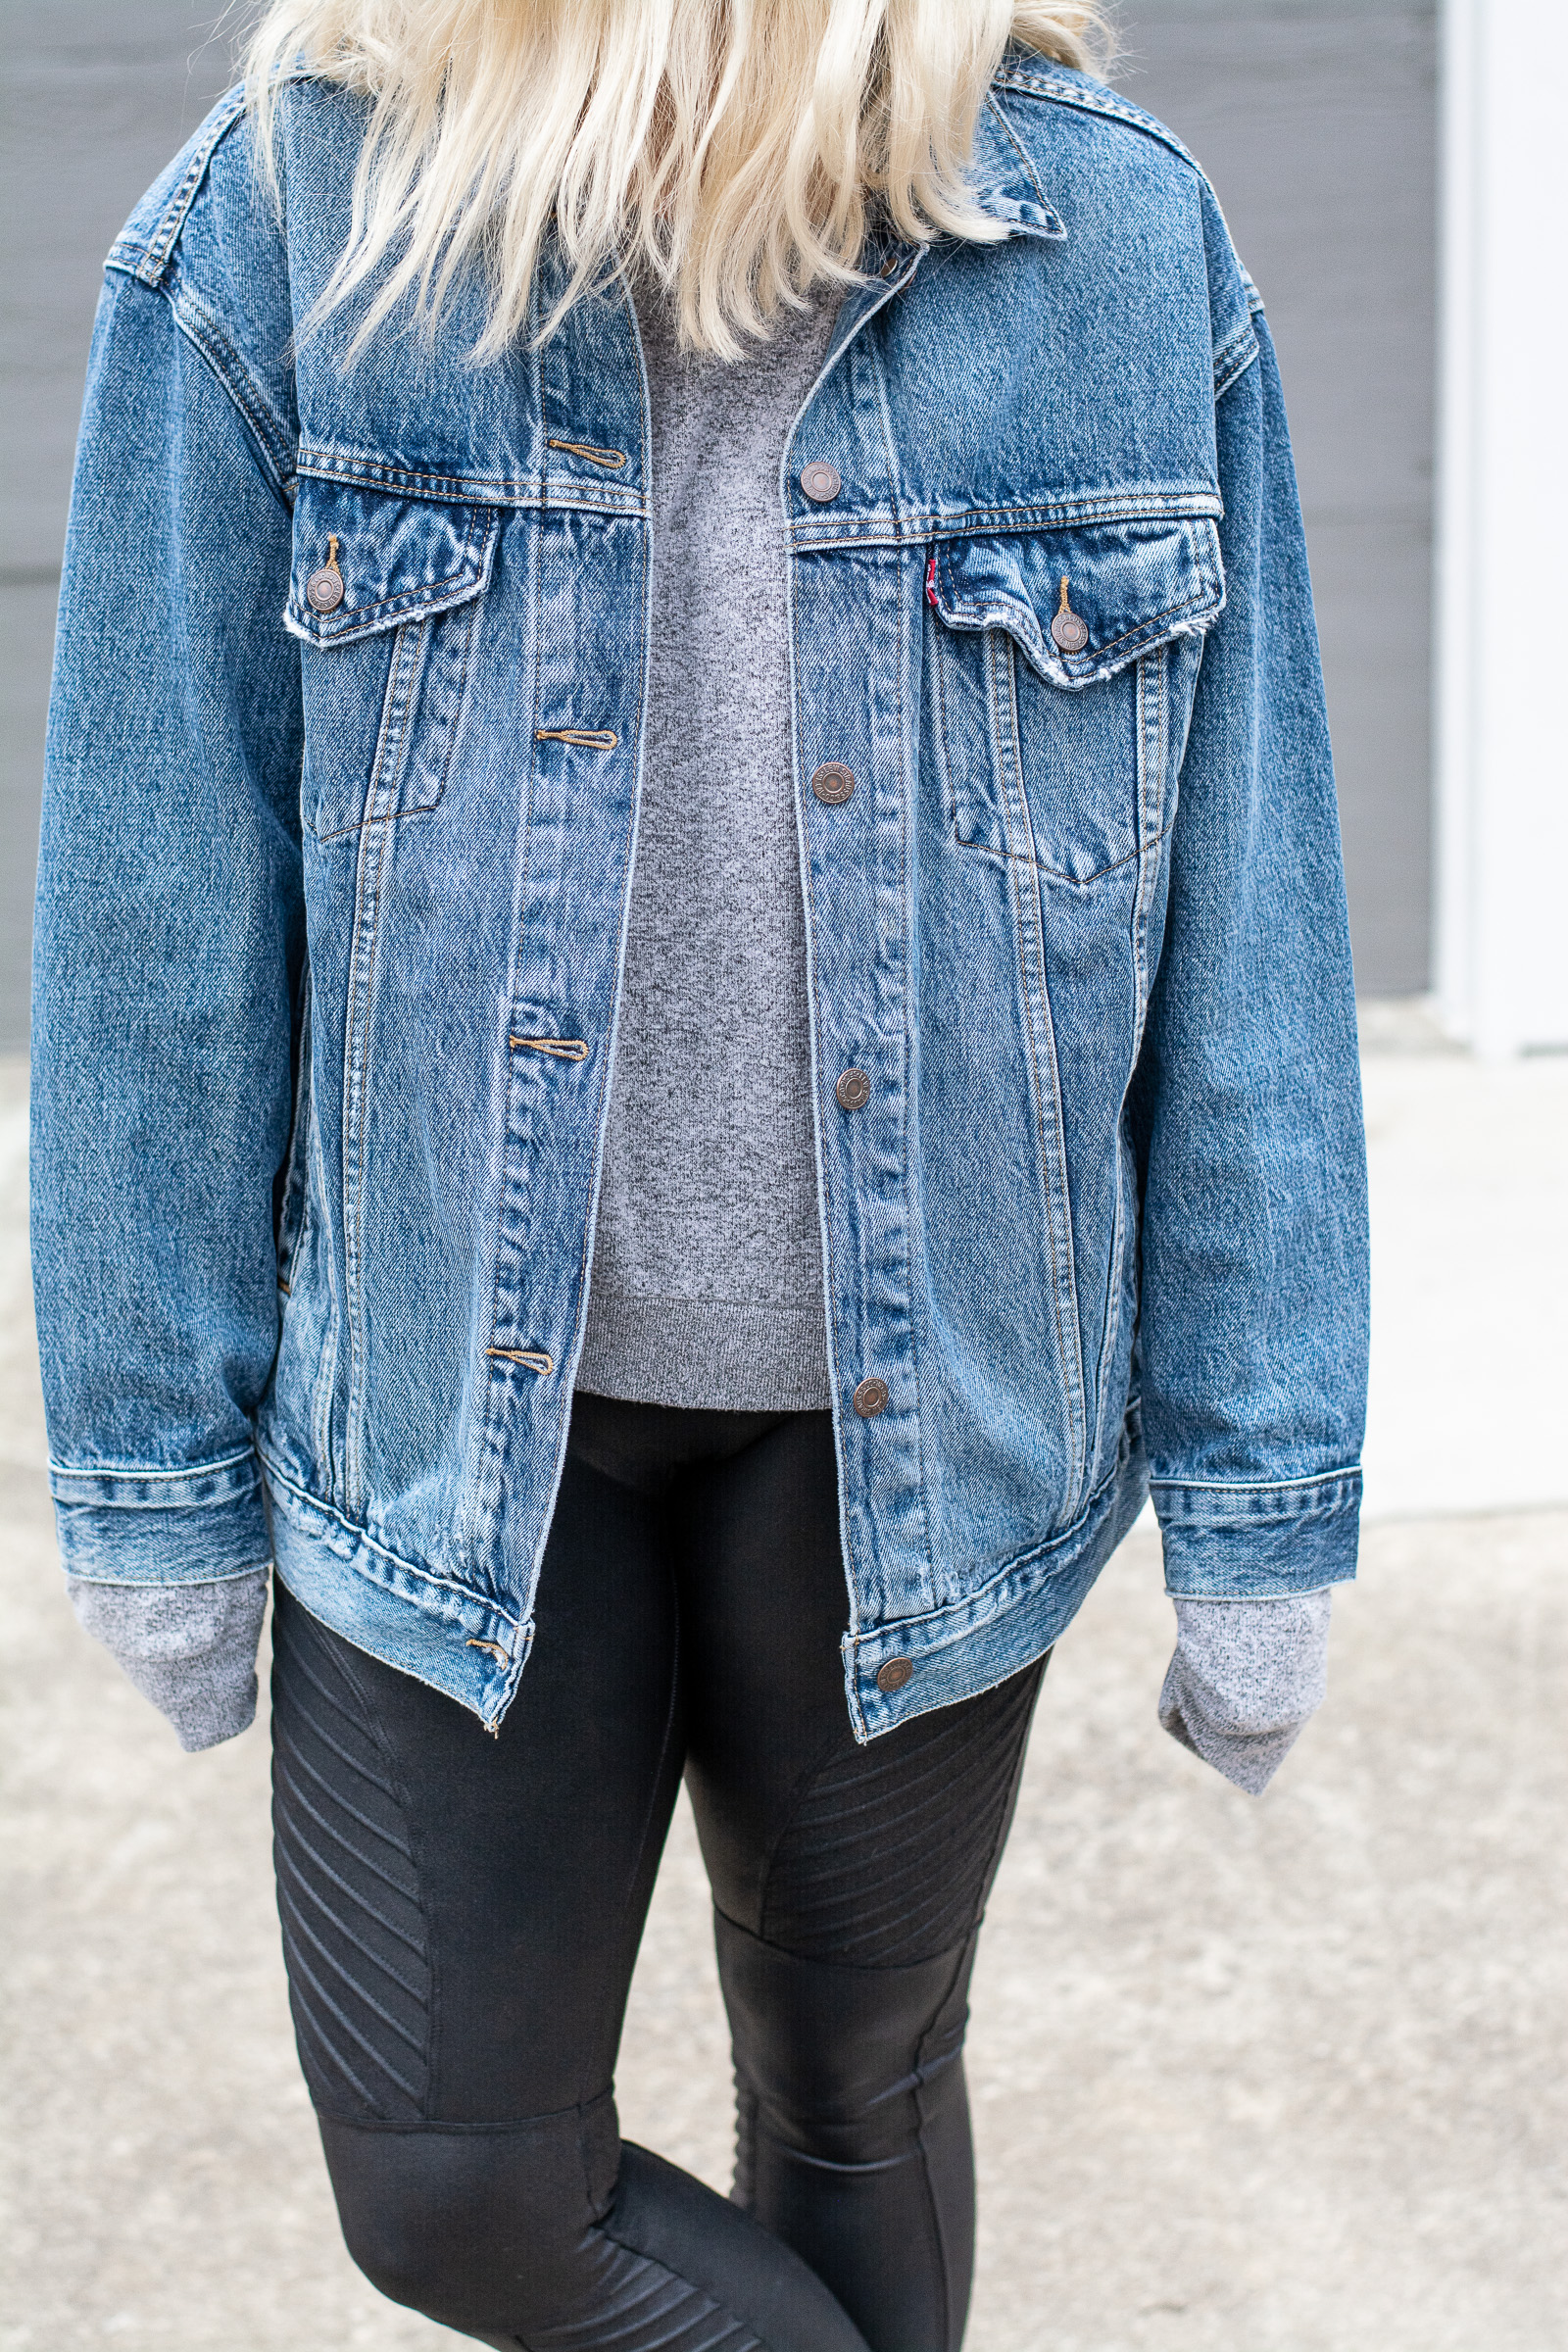 15 Jean Jacket With Leggings Outfits That We Can Not Get Enough Of -  Society19 | Outfits with leggings, Casual winter outfits, Athleisure outfits